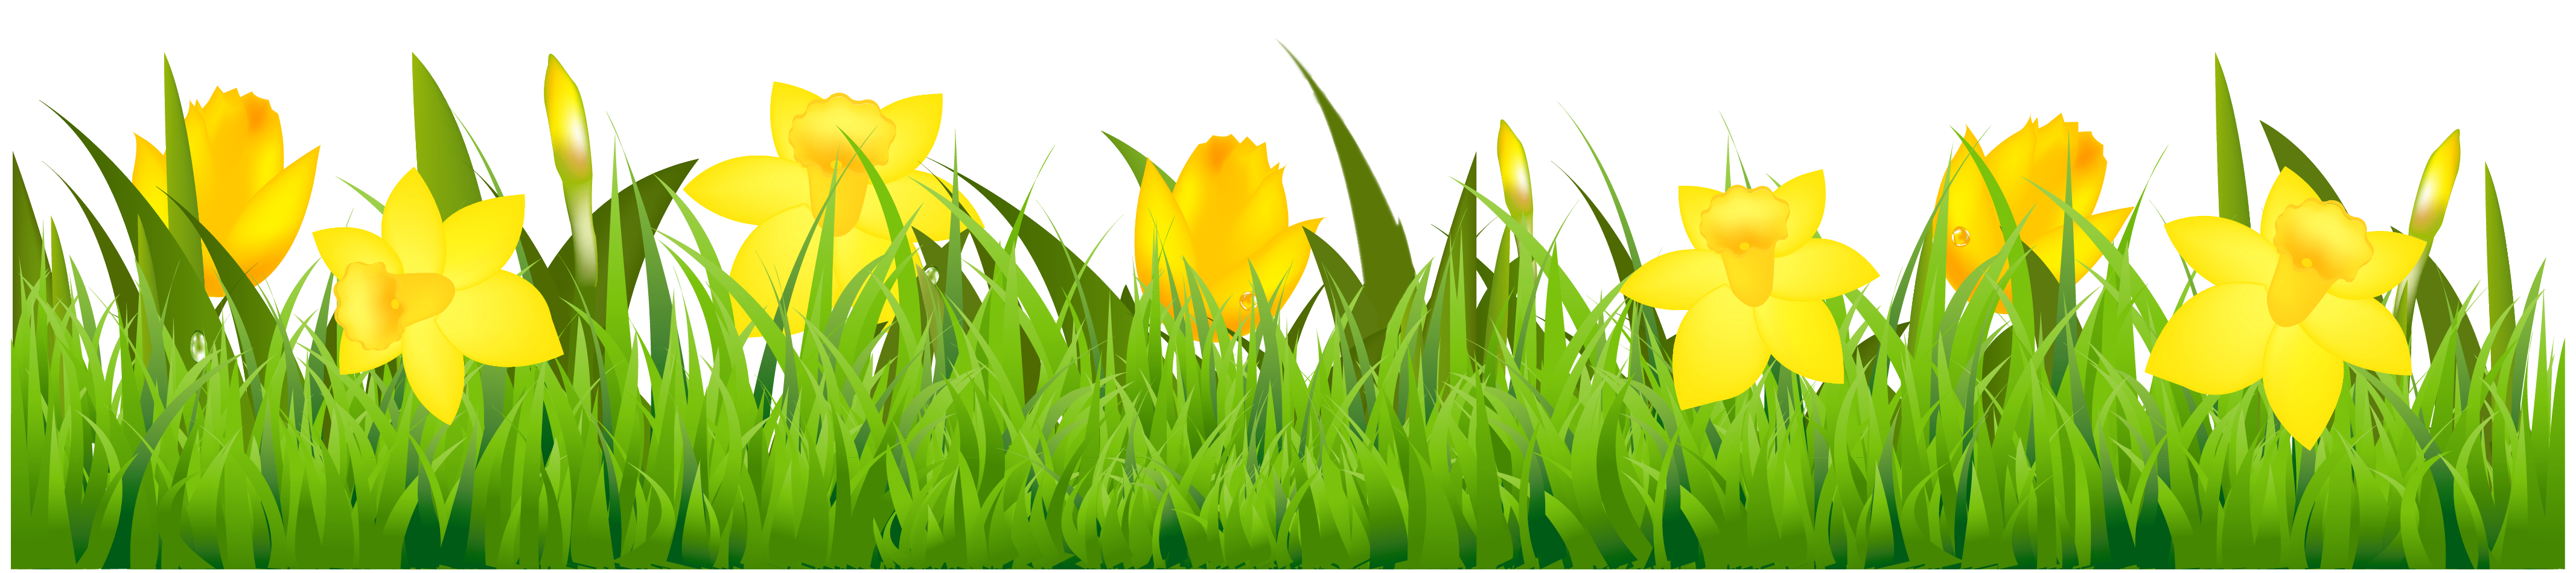 clipart daffodils images - photo #44